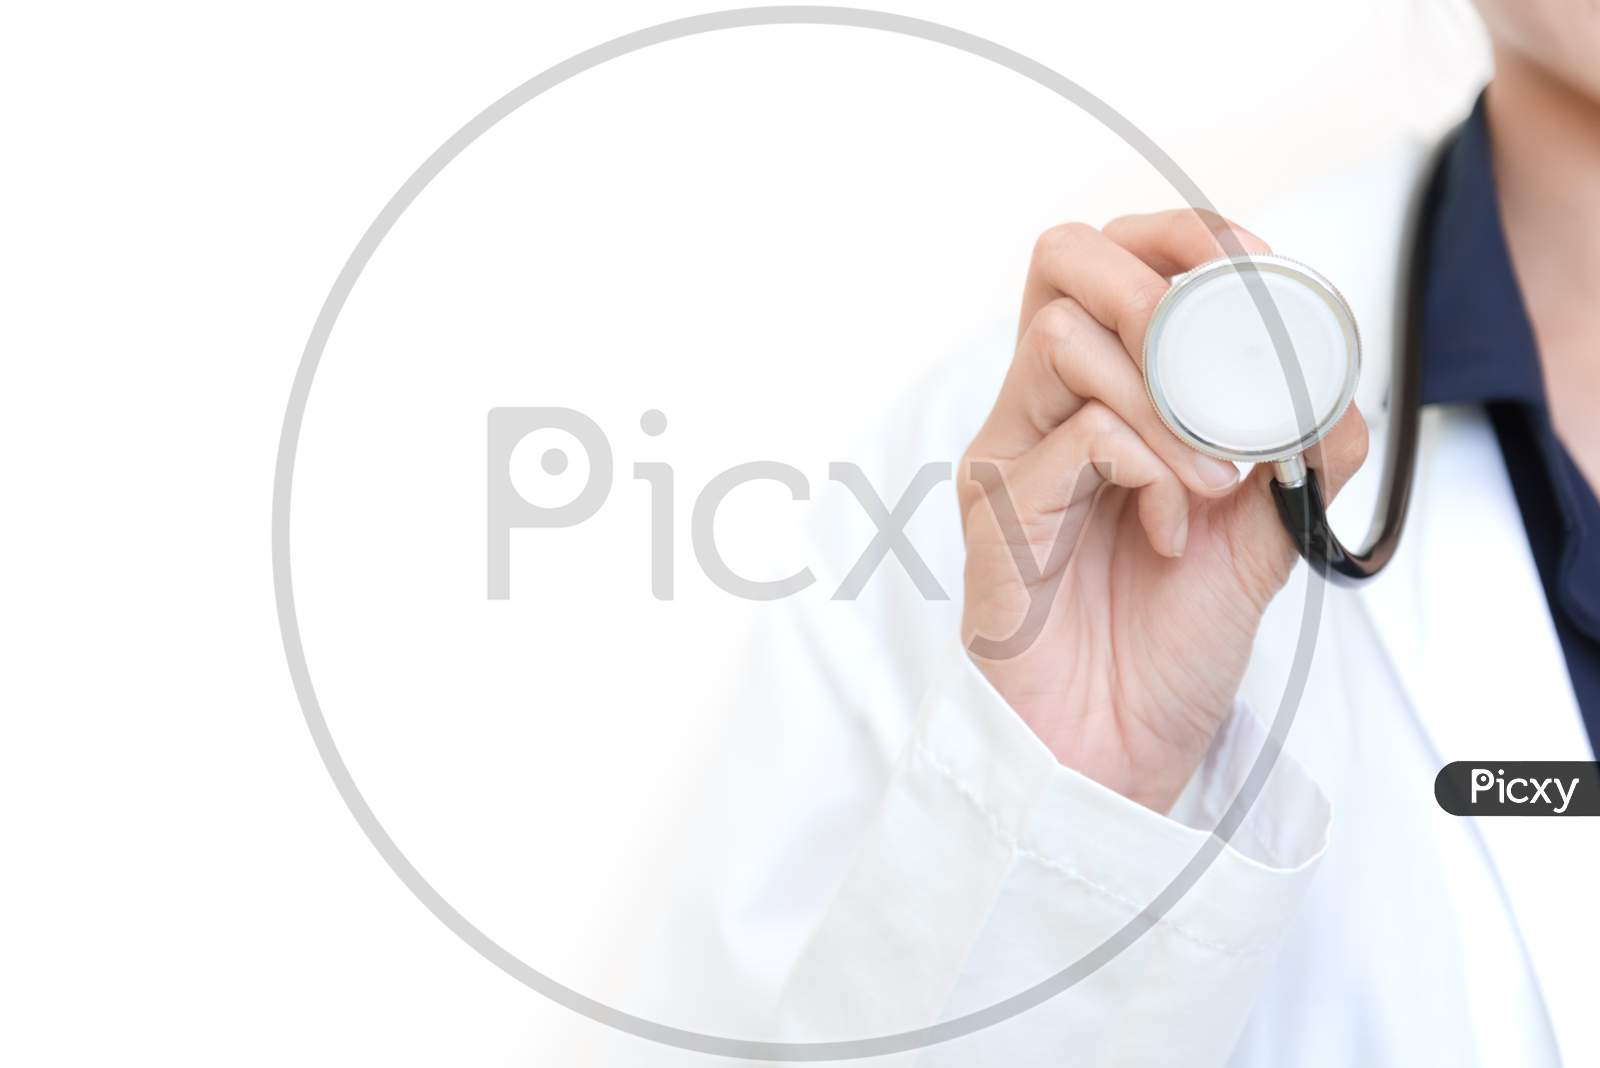 Female Doctor Holding Stethoscope Medical Equipment Tool On White Isolated Background, Doctor And Hospital Concept, Copyspace And Blank